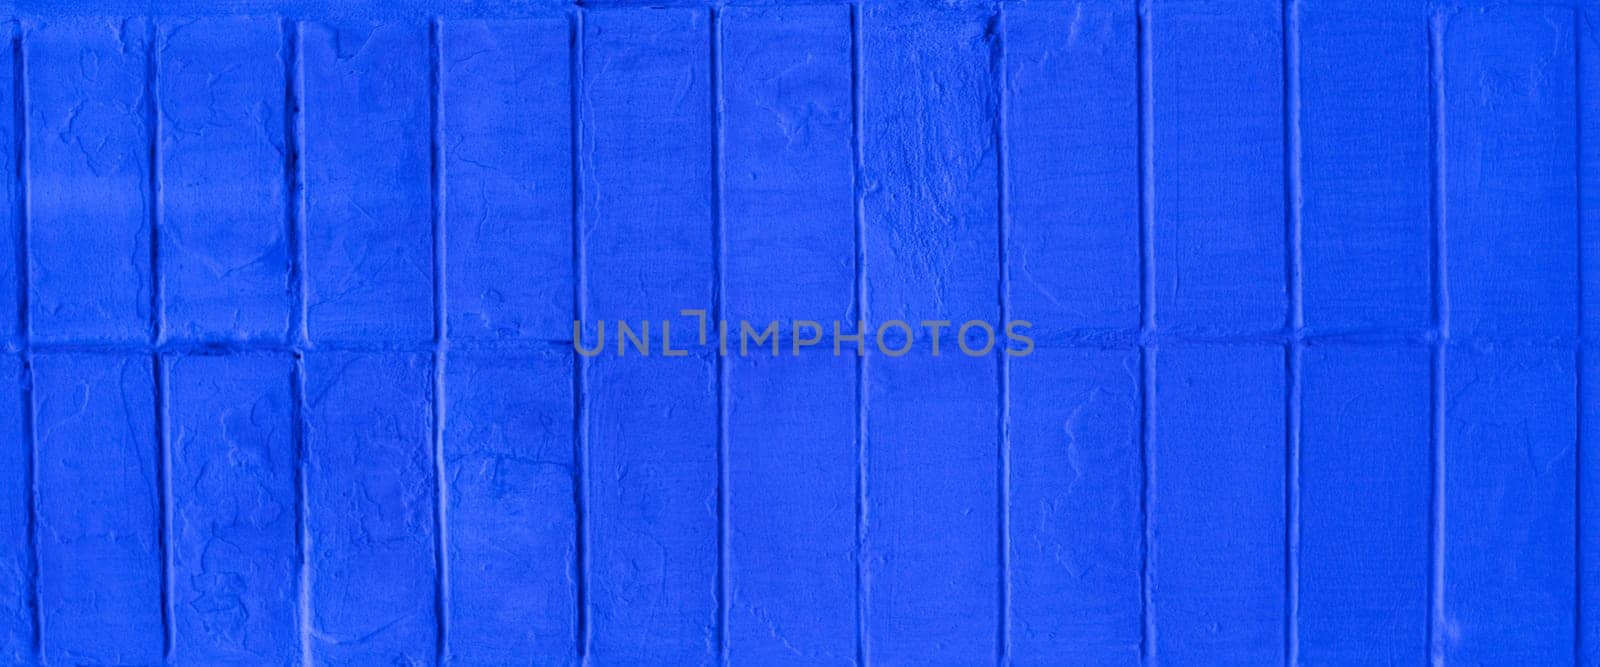 of a brick wall painted with blue paint. by gelog67